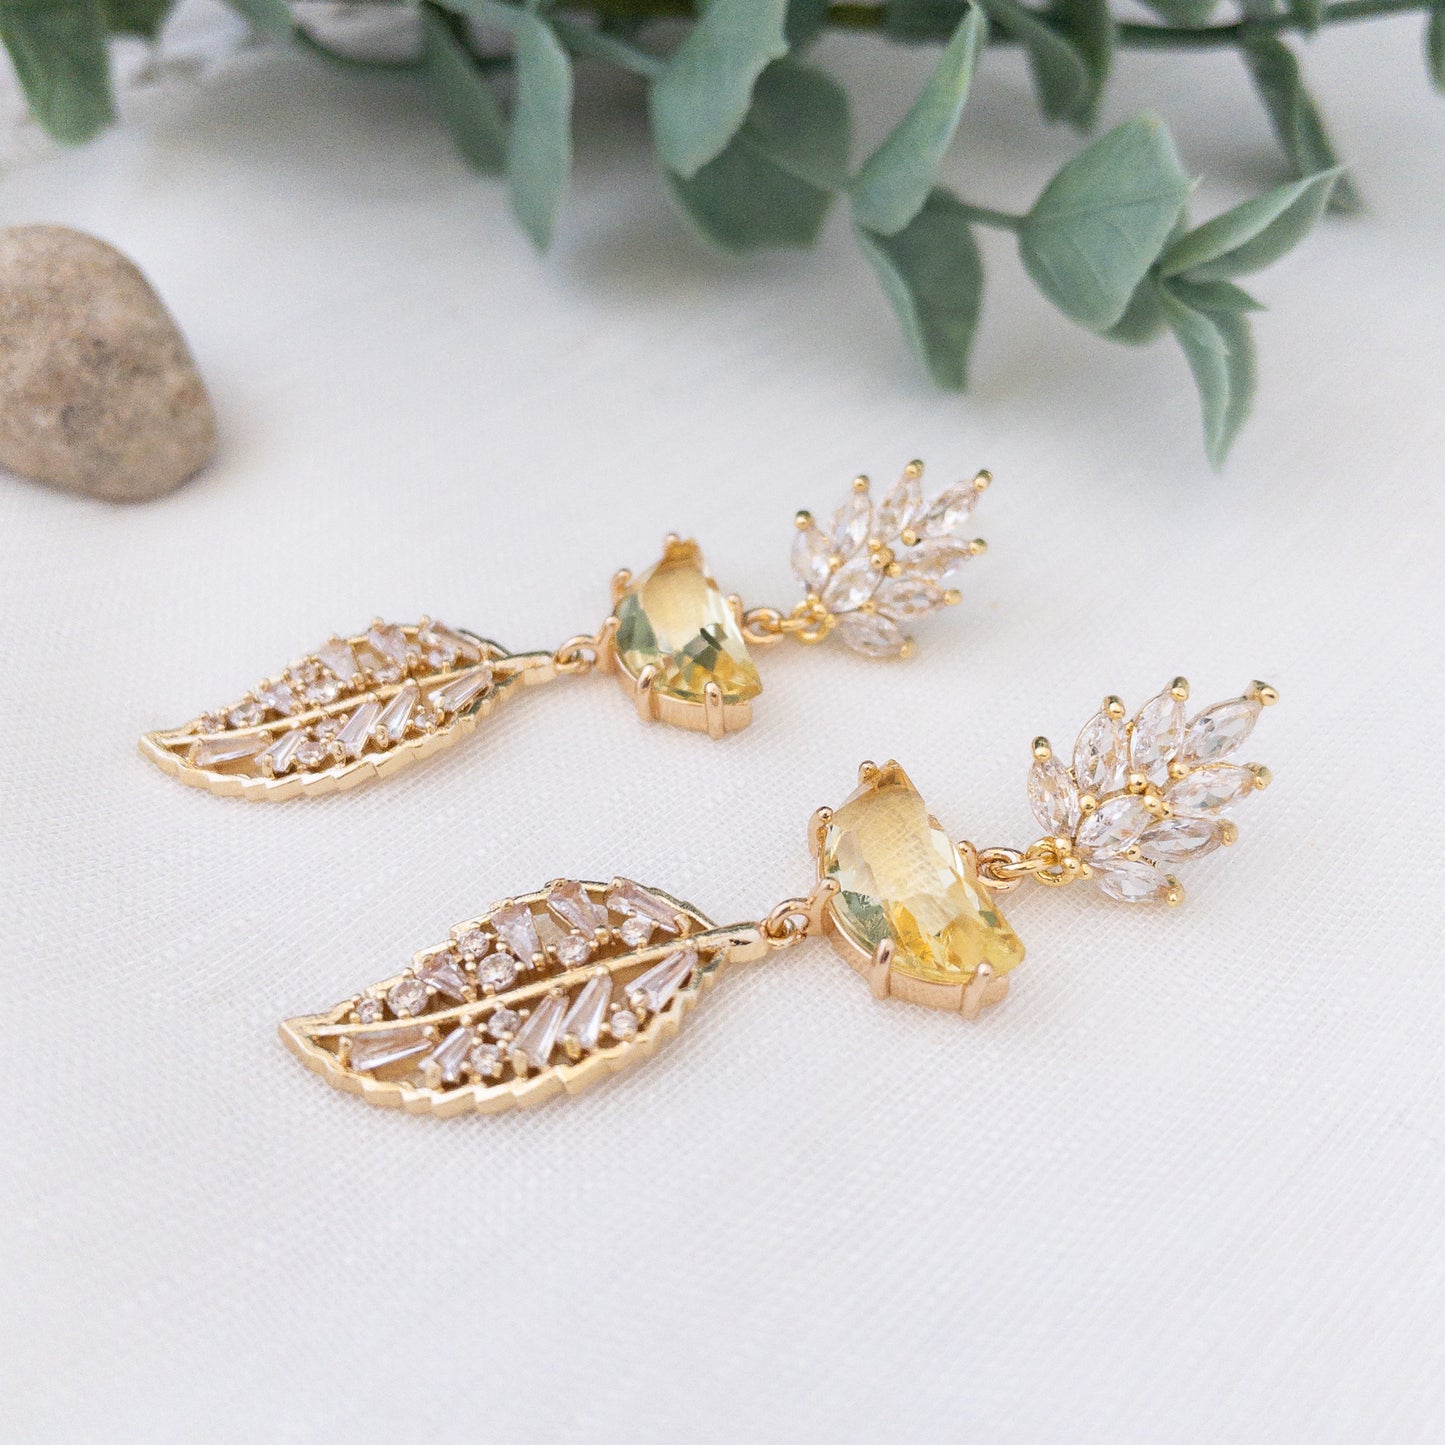 Crystal leaf earrings with yellow stone laying flat on a white surface